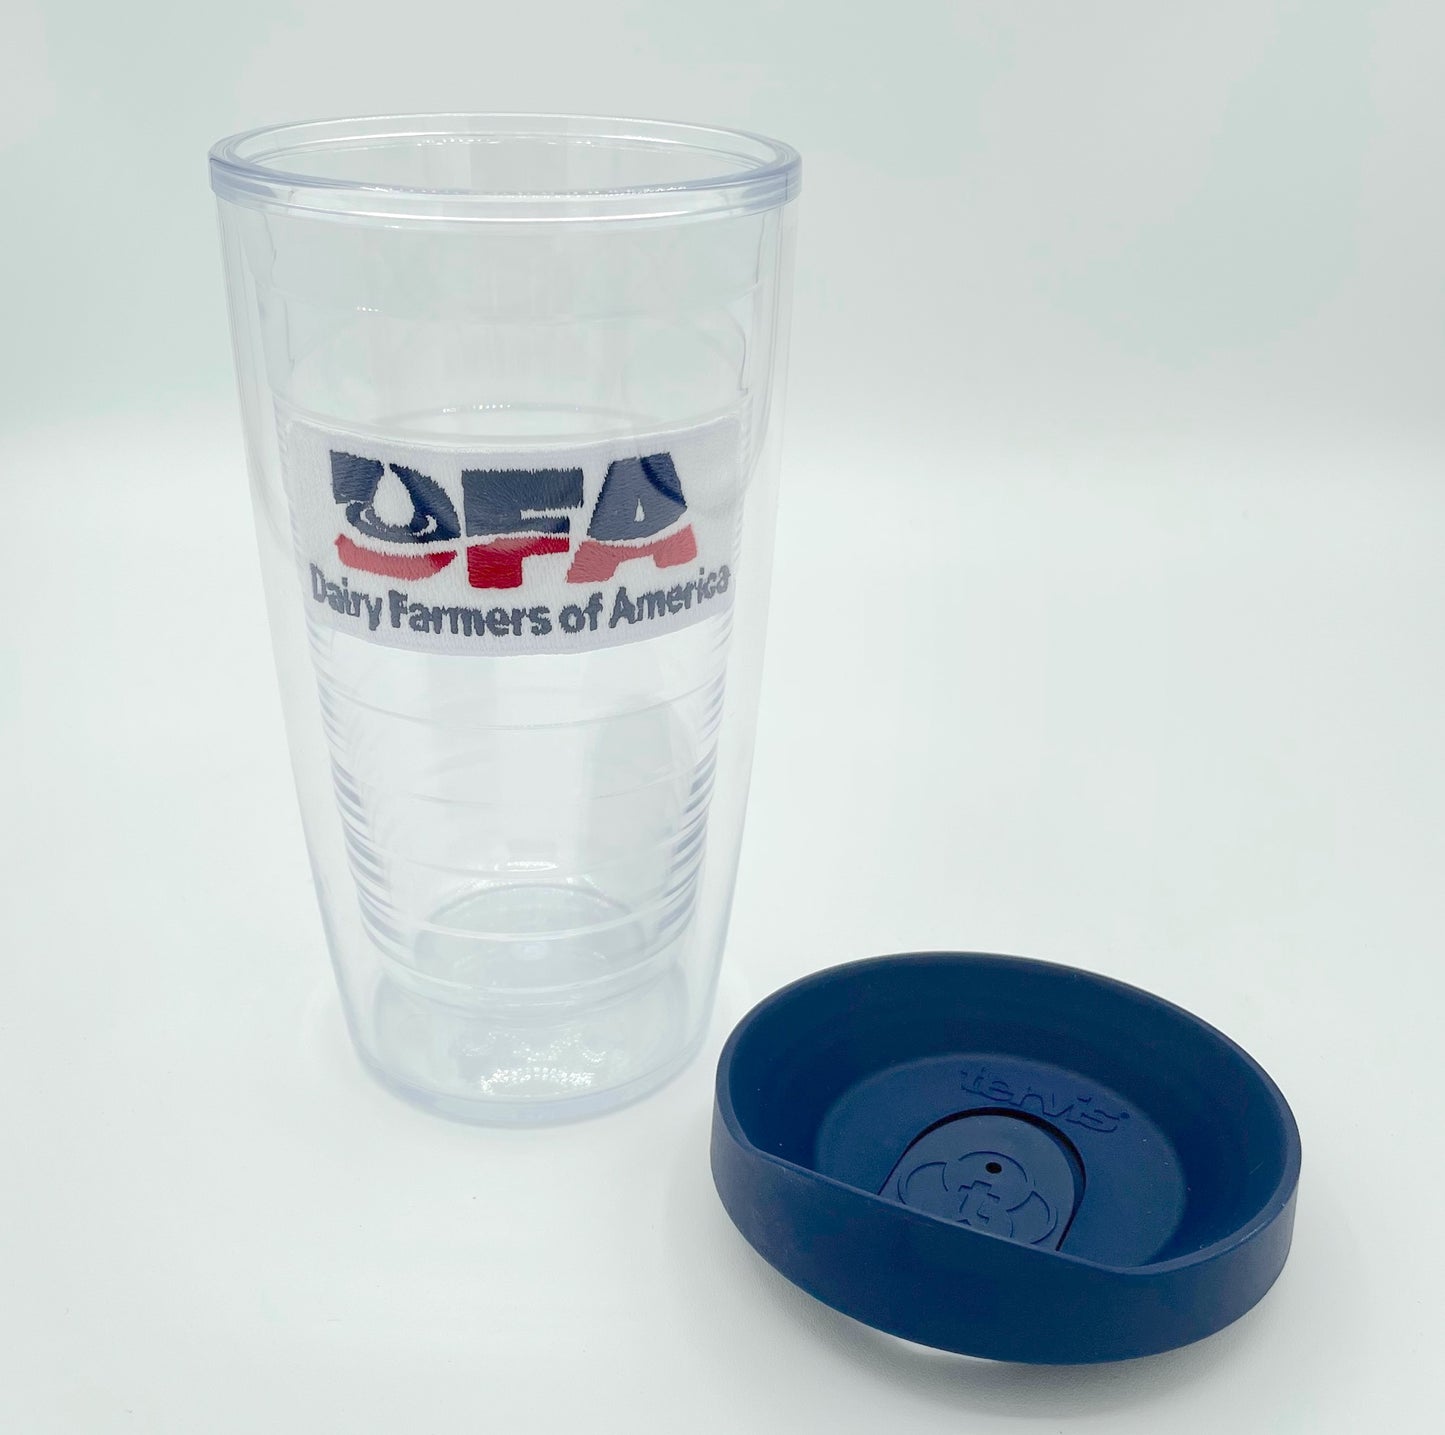 Tervis 16 oz classic with lid